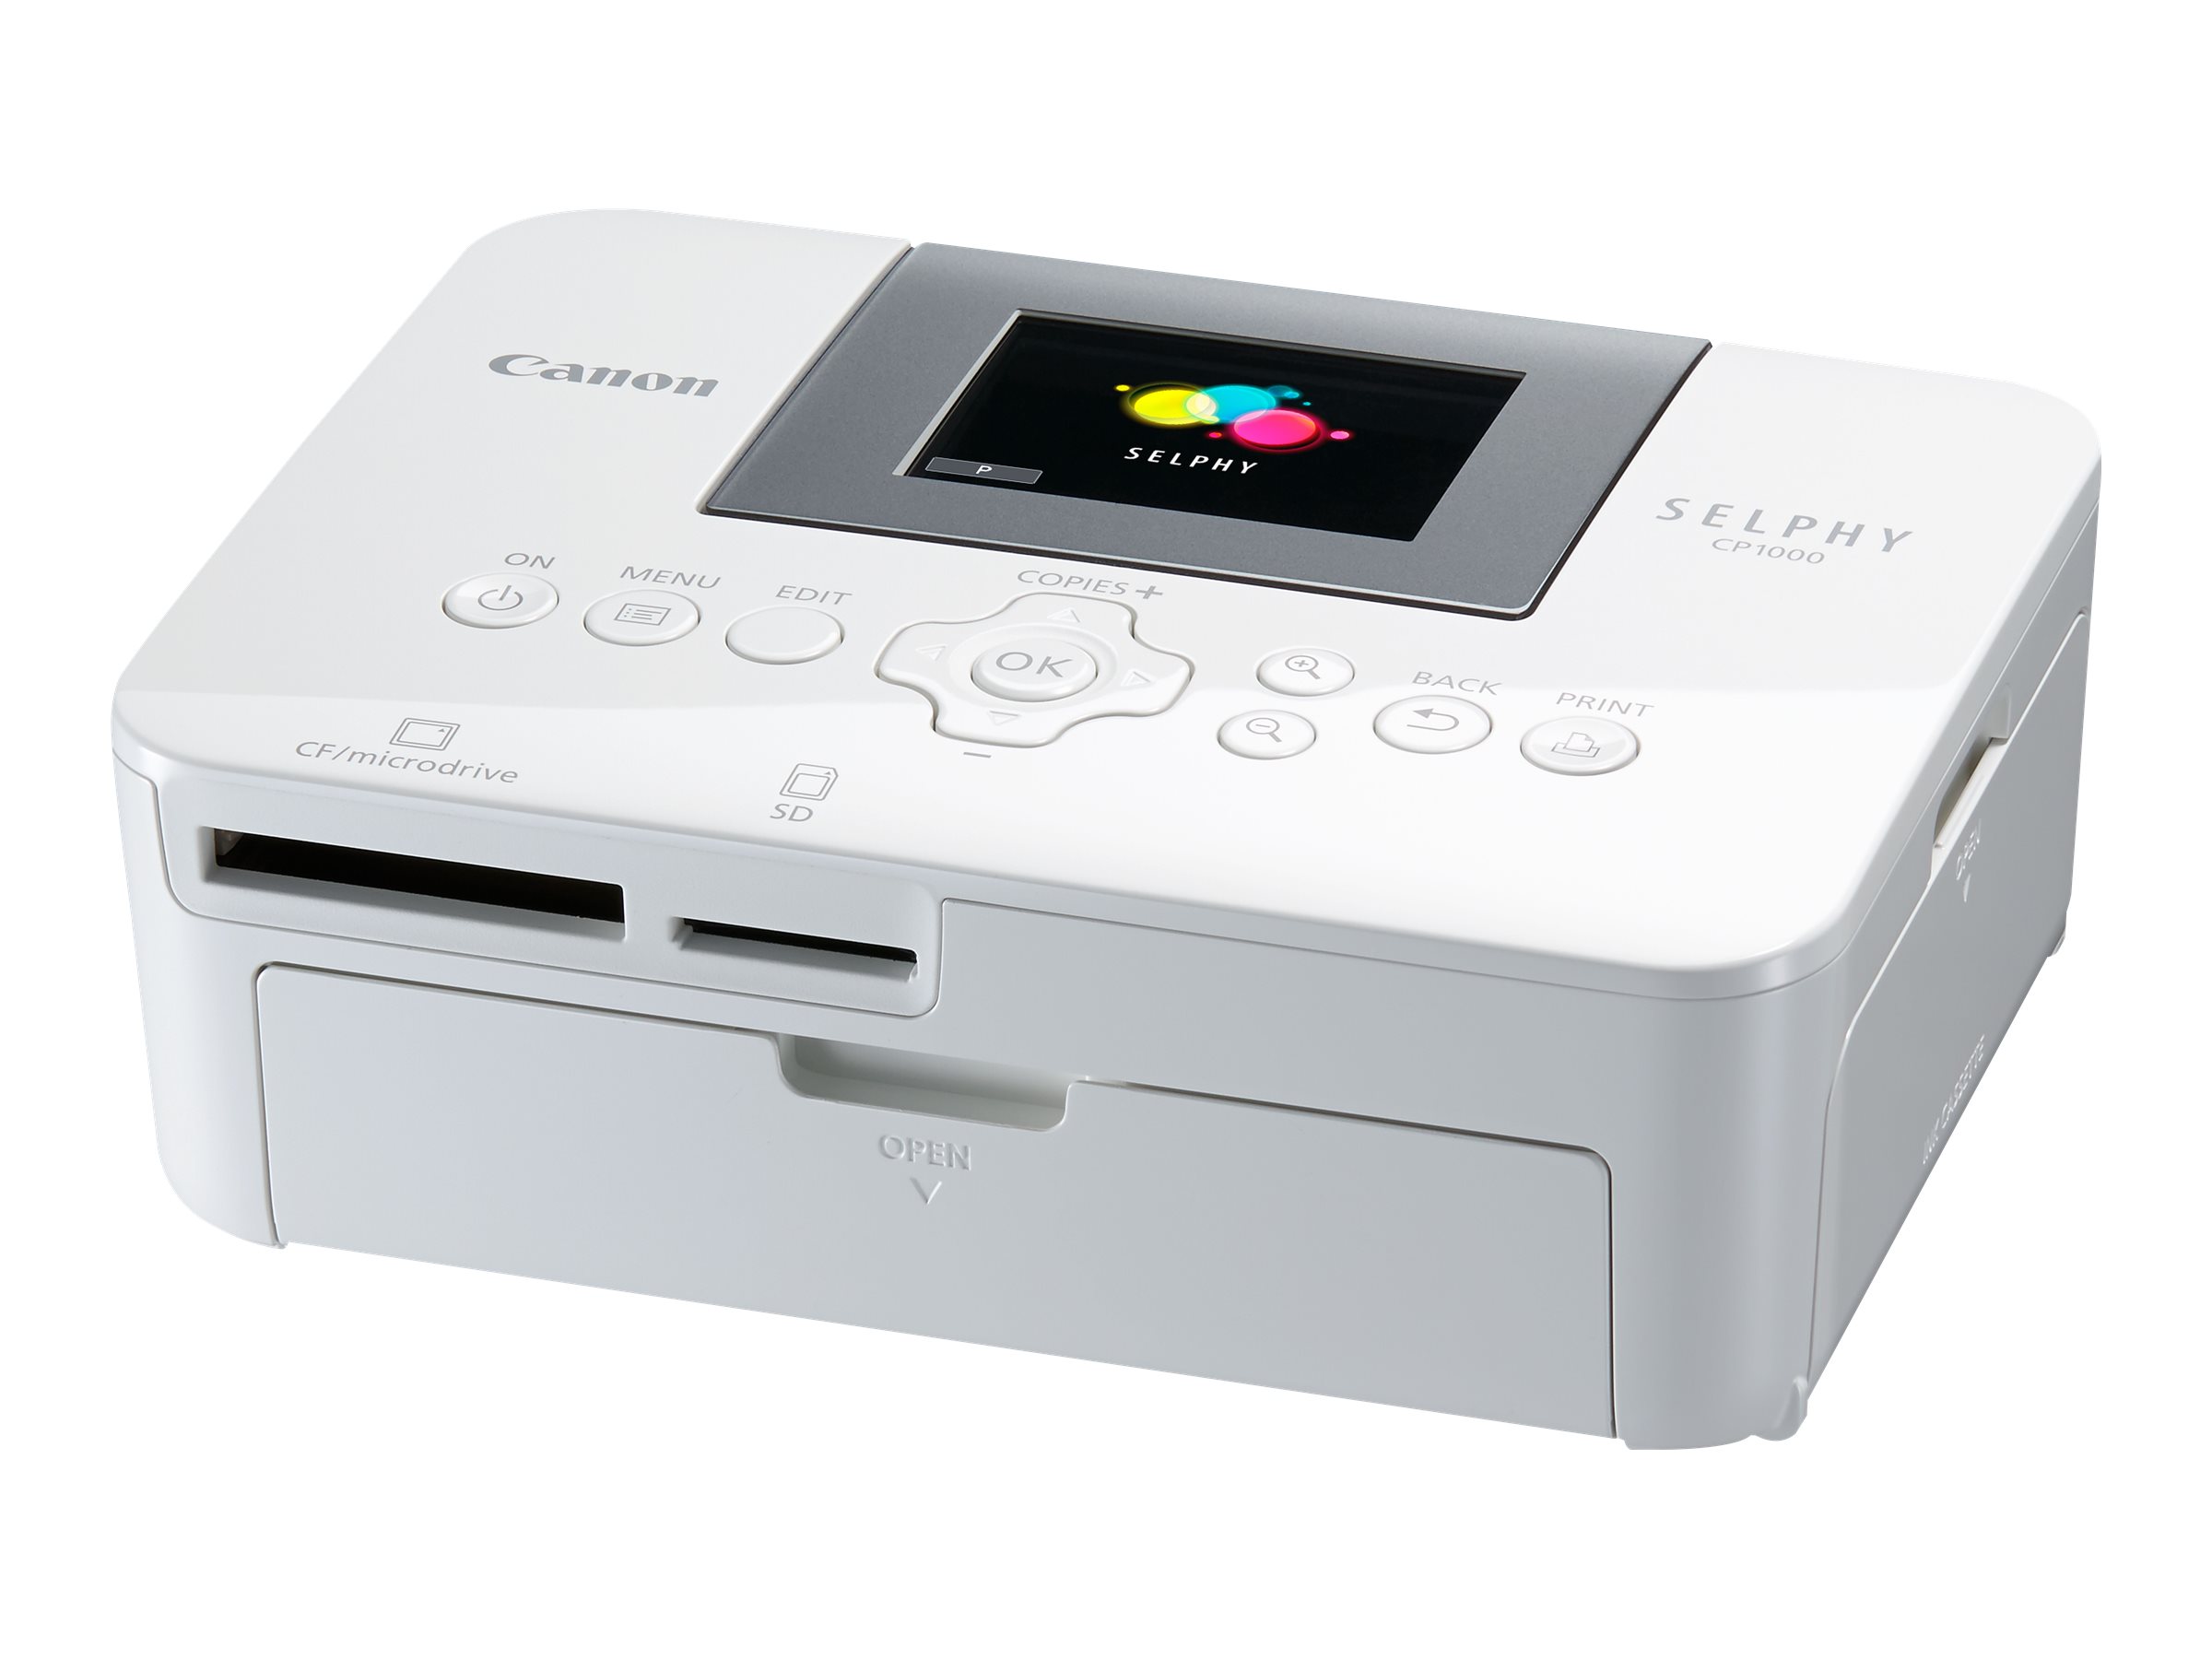 Canon SELPHY CP1000 - Drucker - Farbe - Thermosublimation - 100 x 148 mm bis zu 0.45 Min./Seite (Farbe) - USB, USB-Host